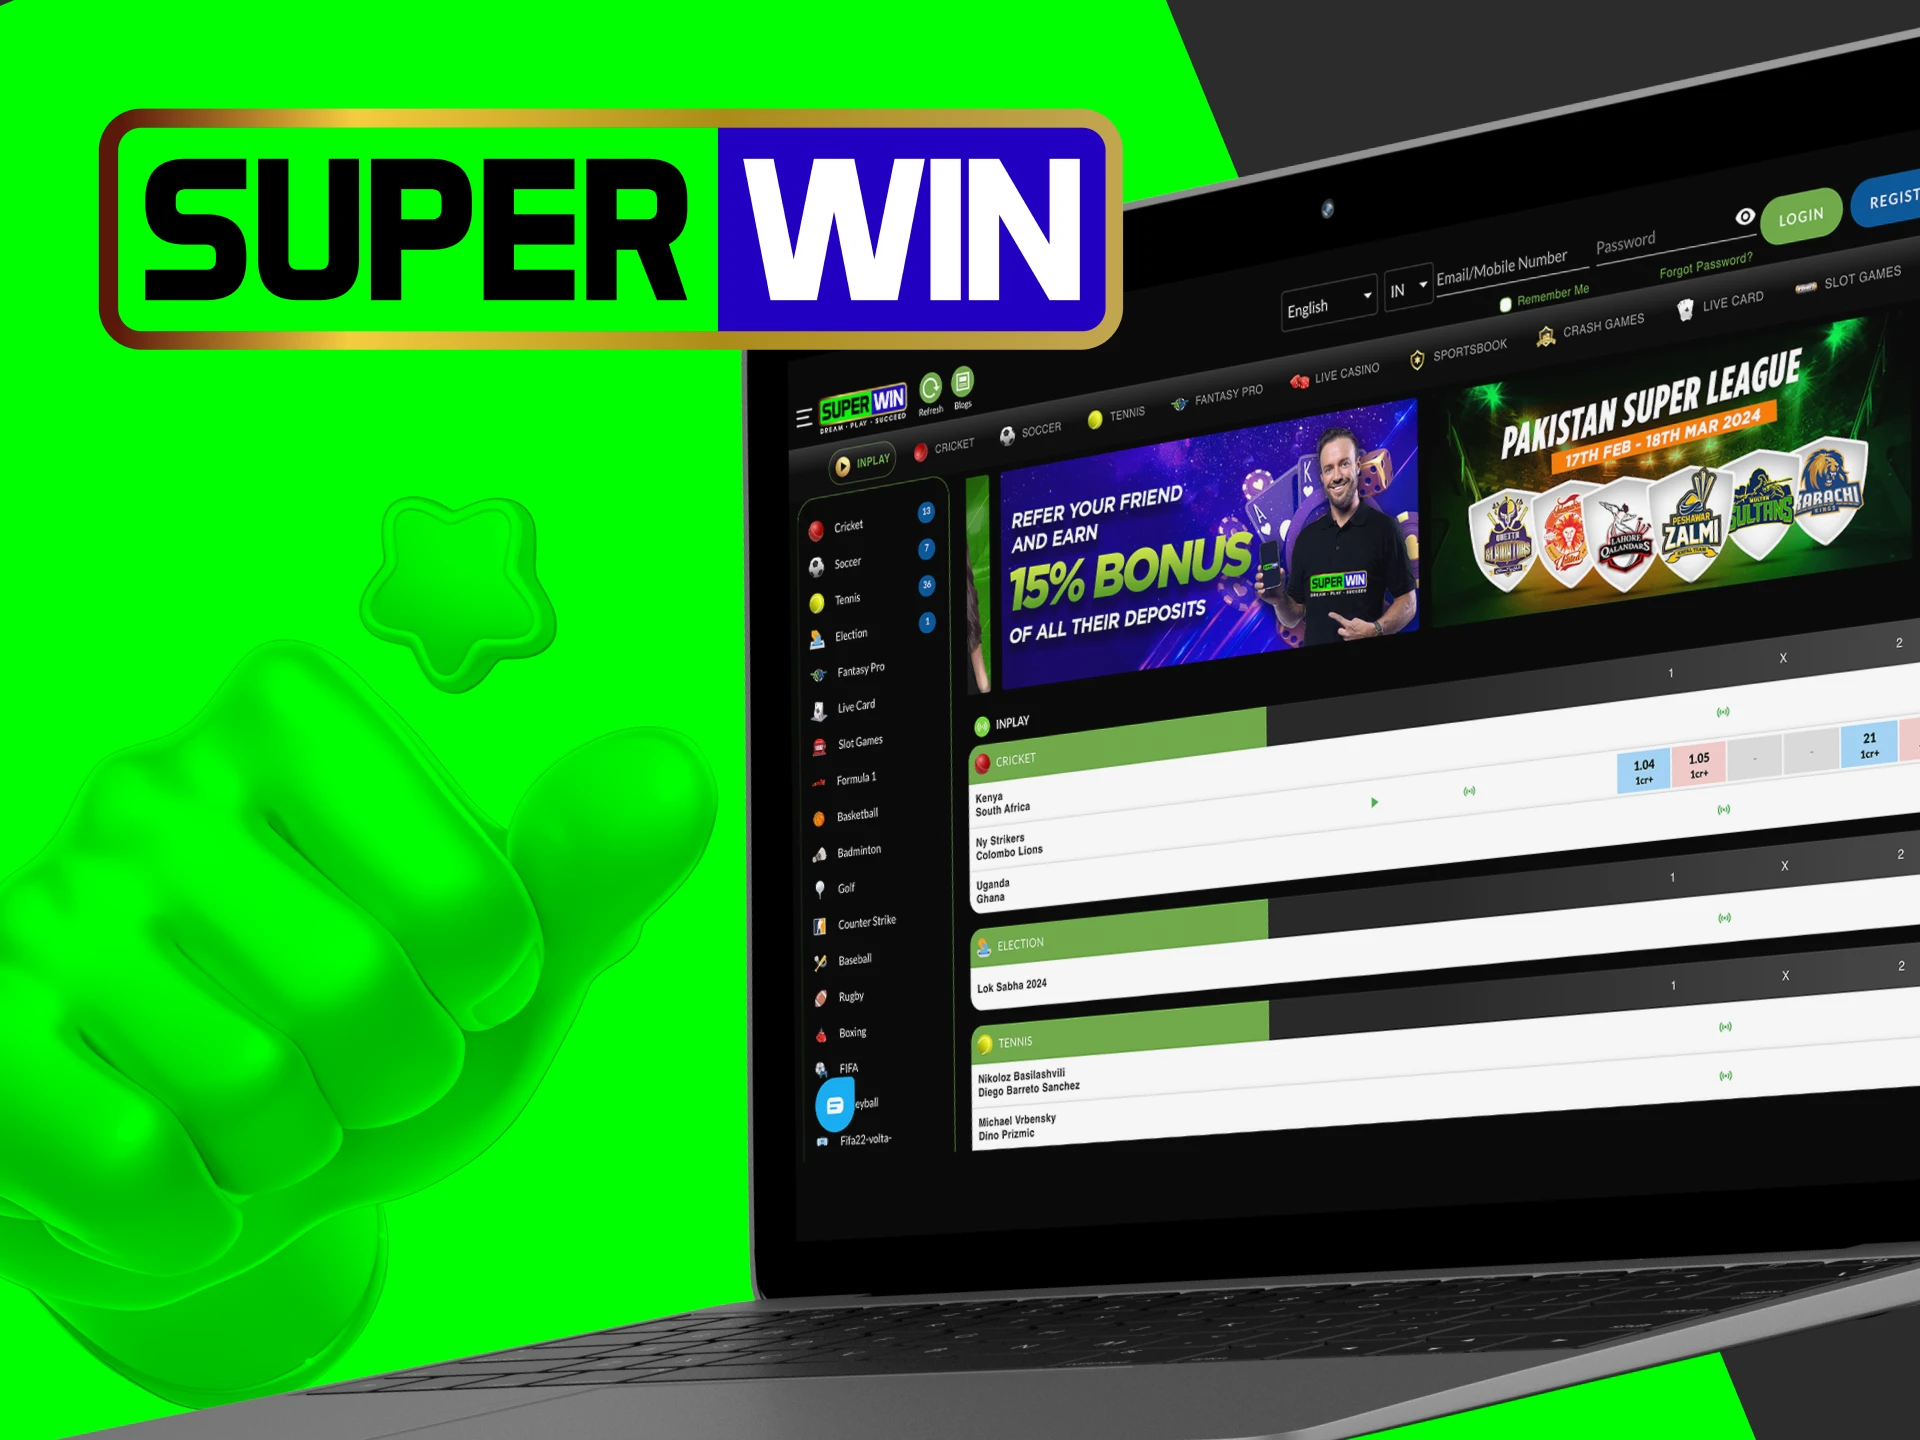 Why should I choose SuperWin online casino to bet on IPL matches.